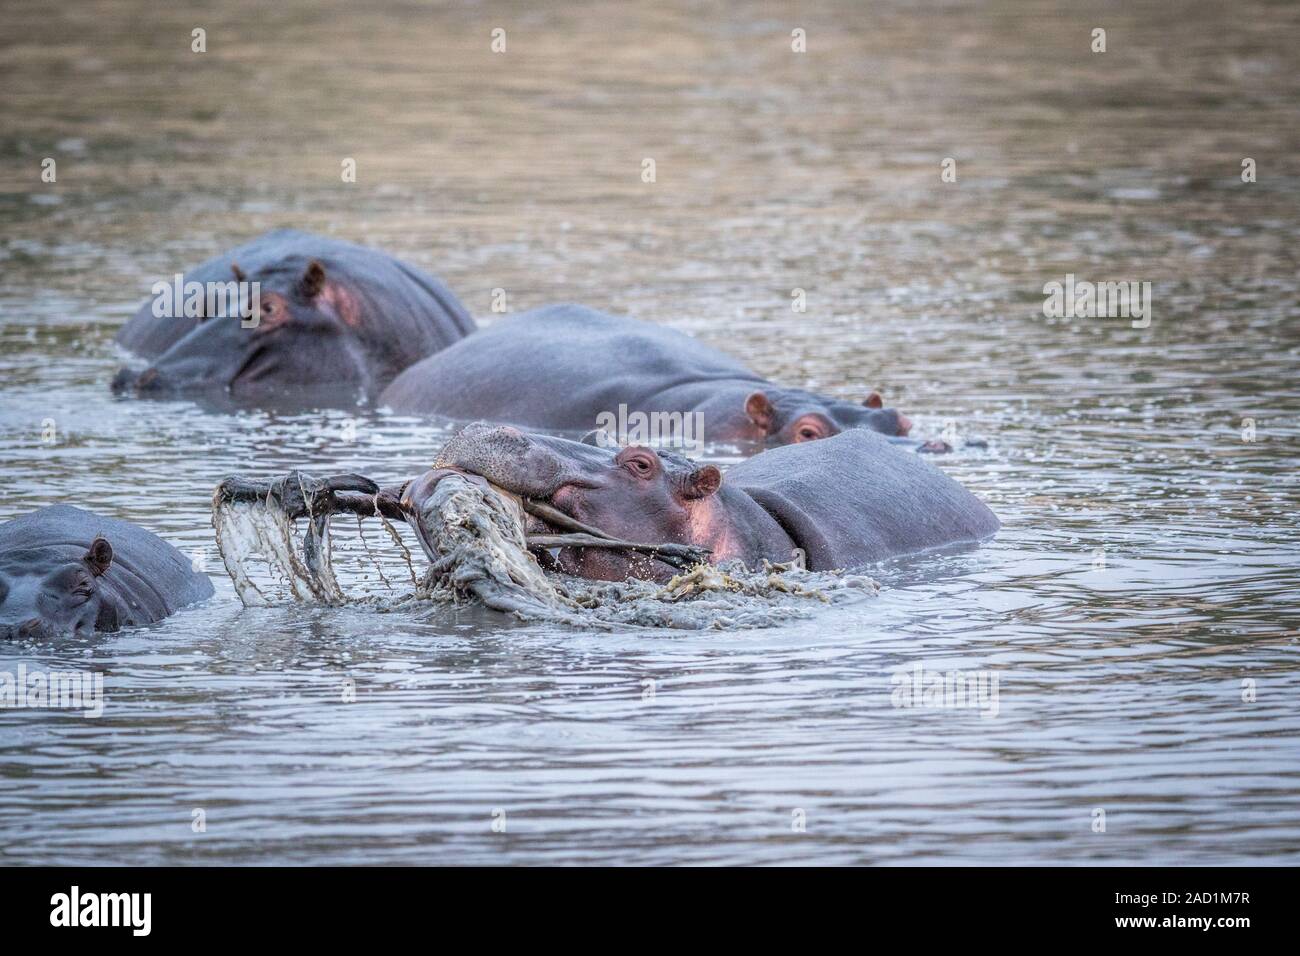 A hippo lifting an impala out of the water in the Kruger. Stock Photo